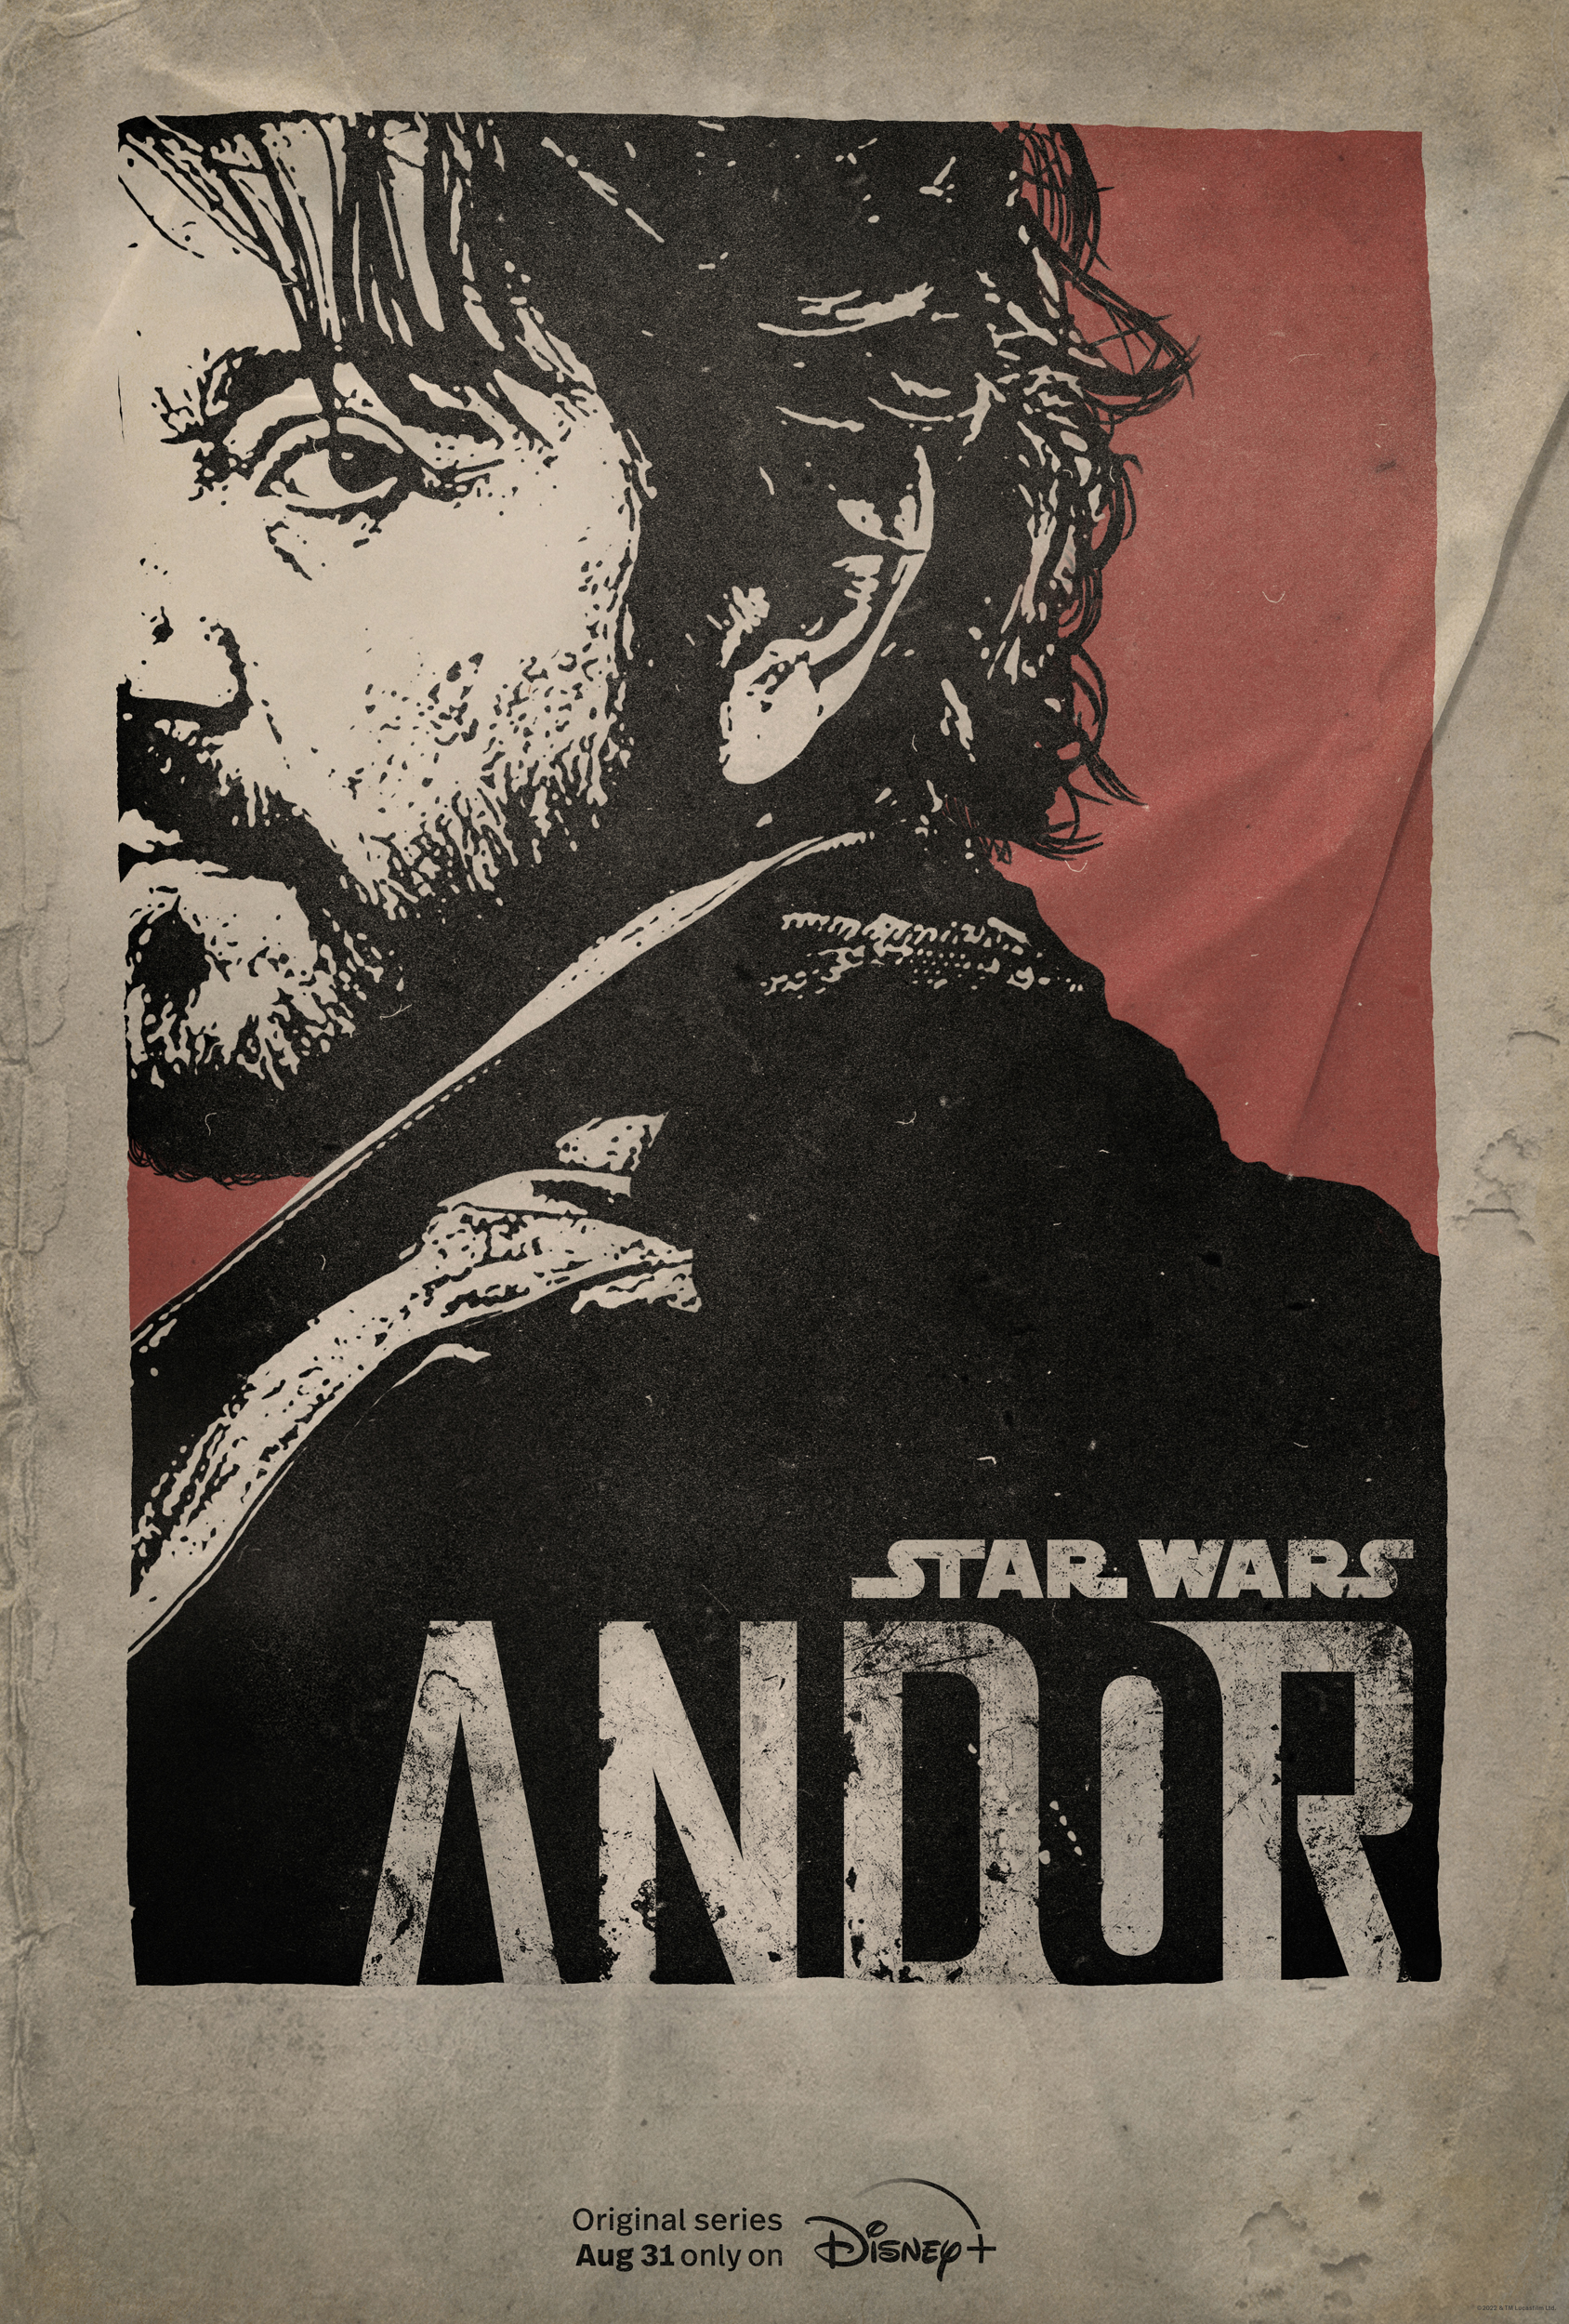 Diego Luna and the Cast and Crew of Andor